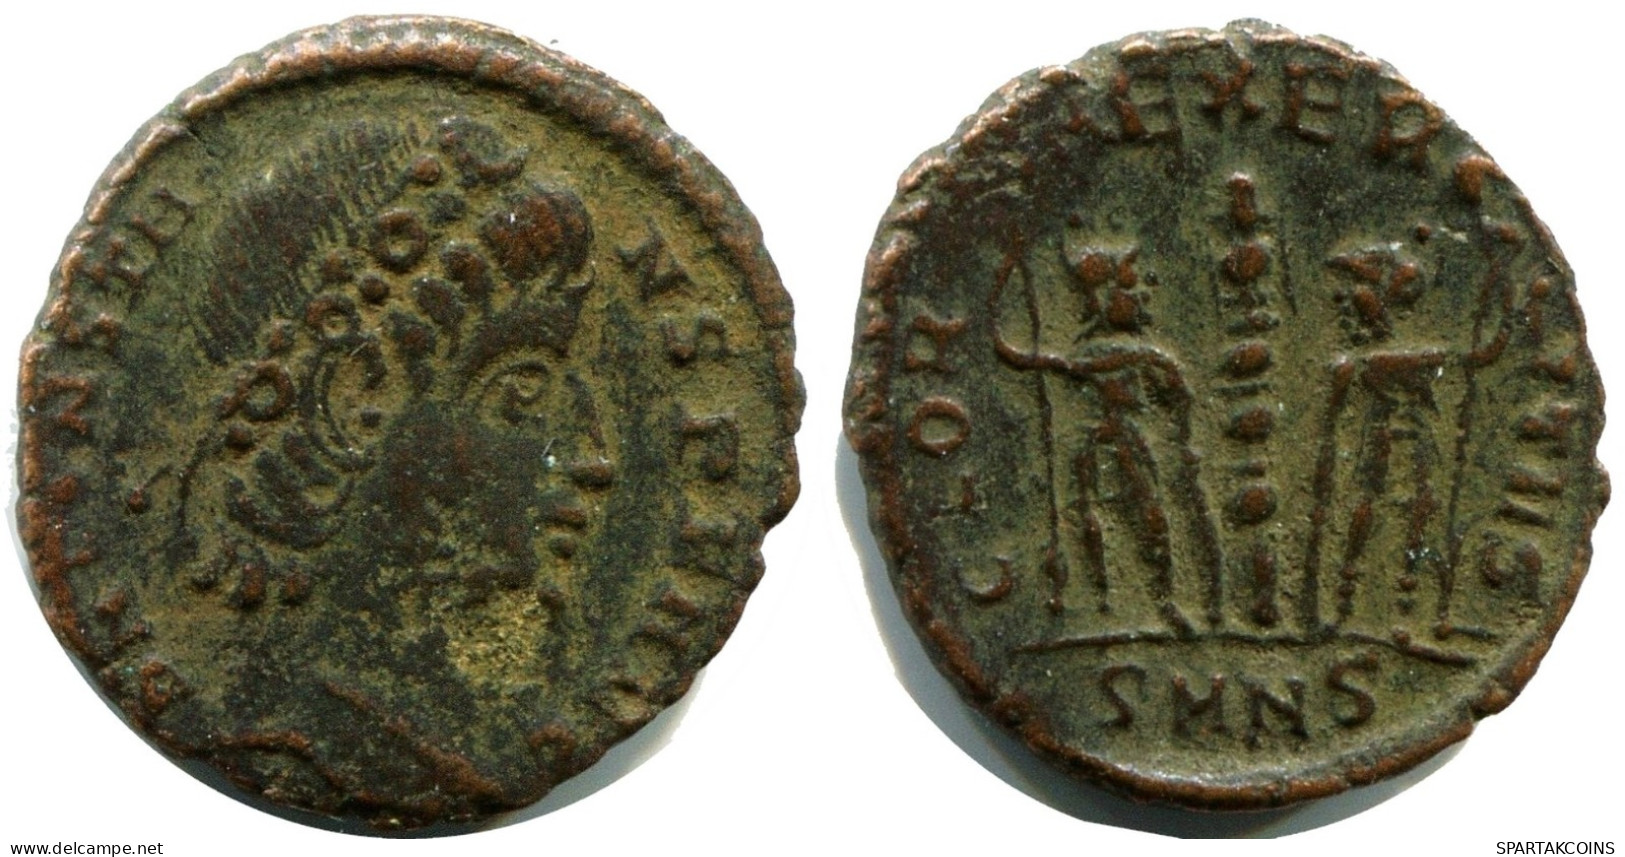 CONSTANS MINTED IN NICOMEDIA FROM THE ROYAL ONTARIO MUSEUM #ANC11775.14.E.A - L'Empire Chrétien (307 à 363)